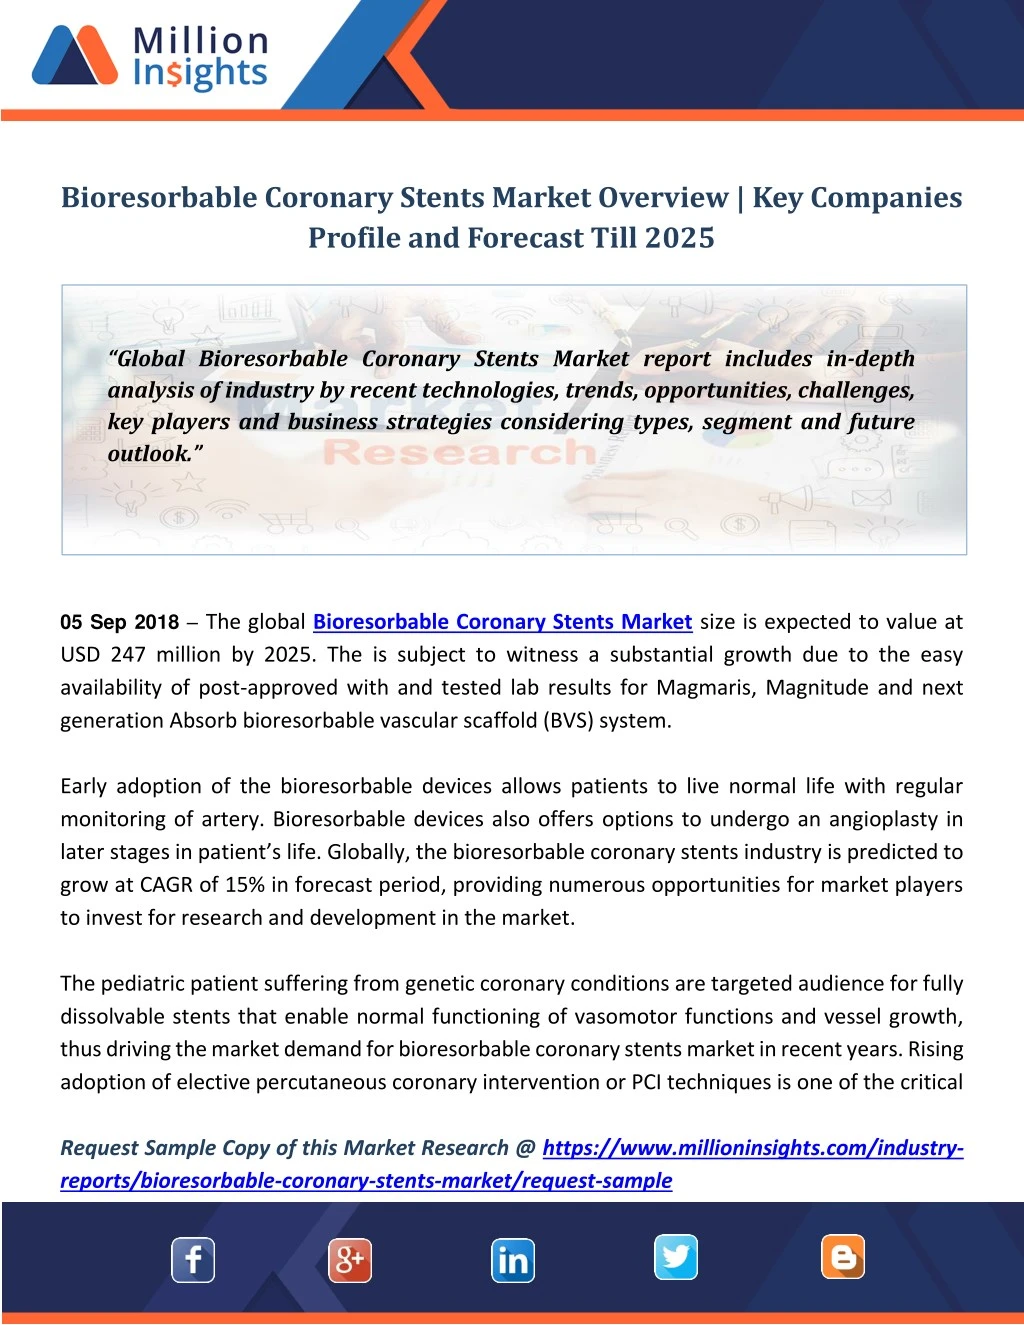 bioresorbable coronary stents market overview